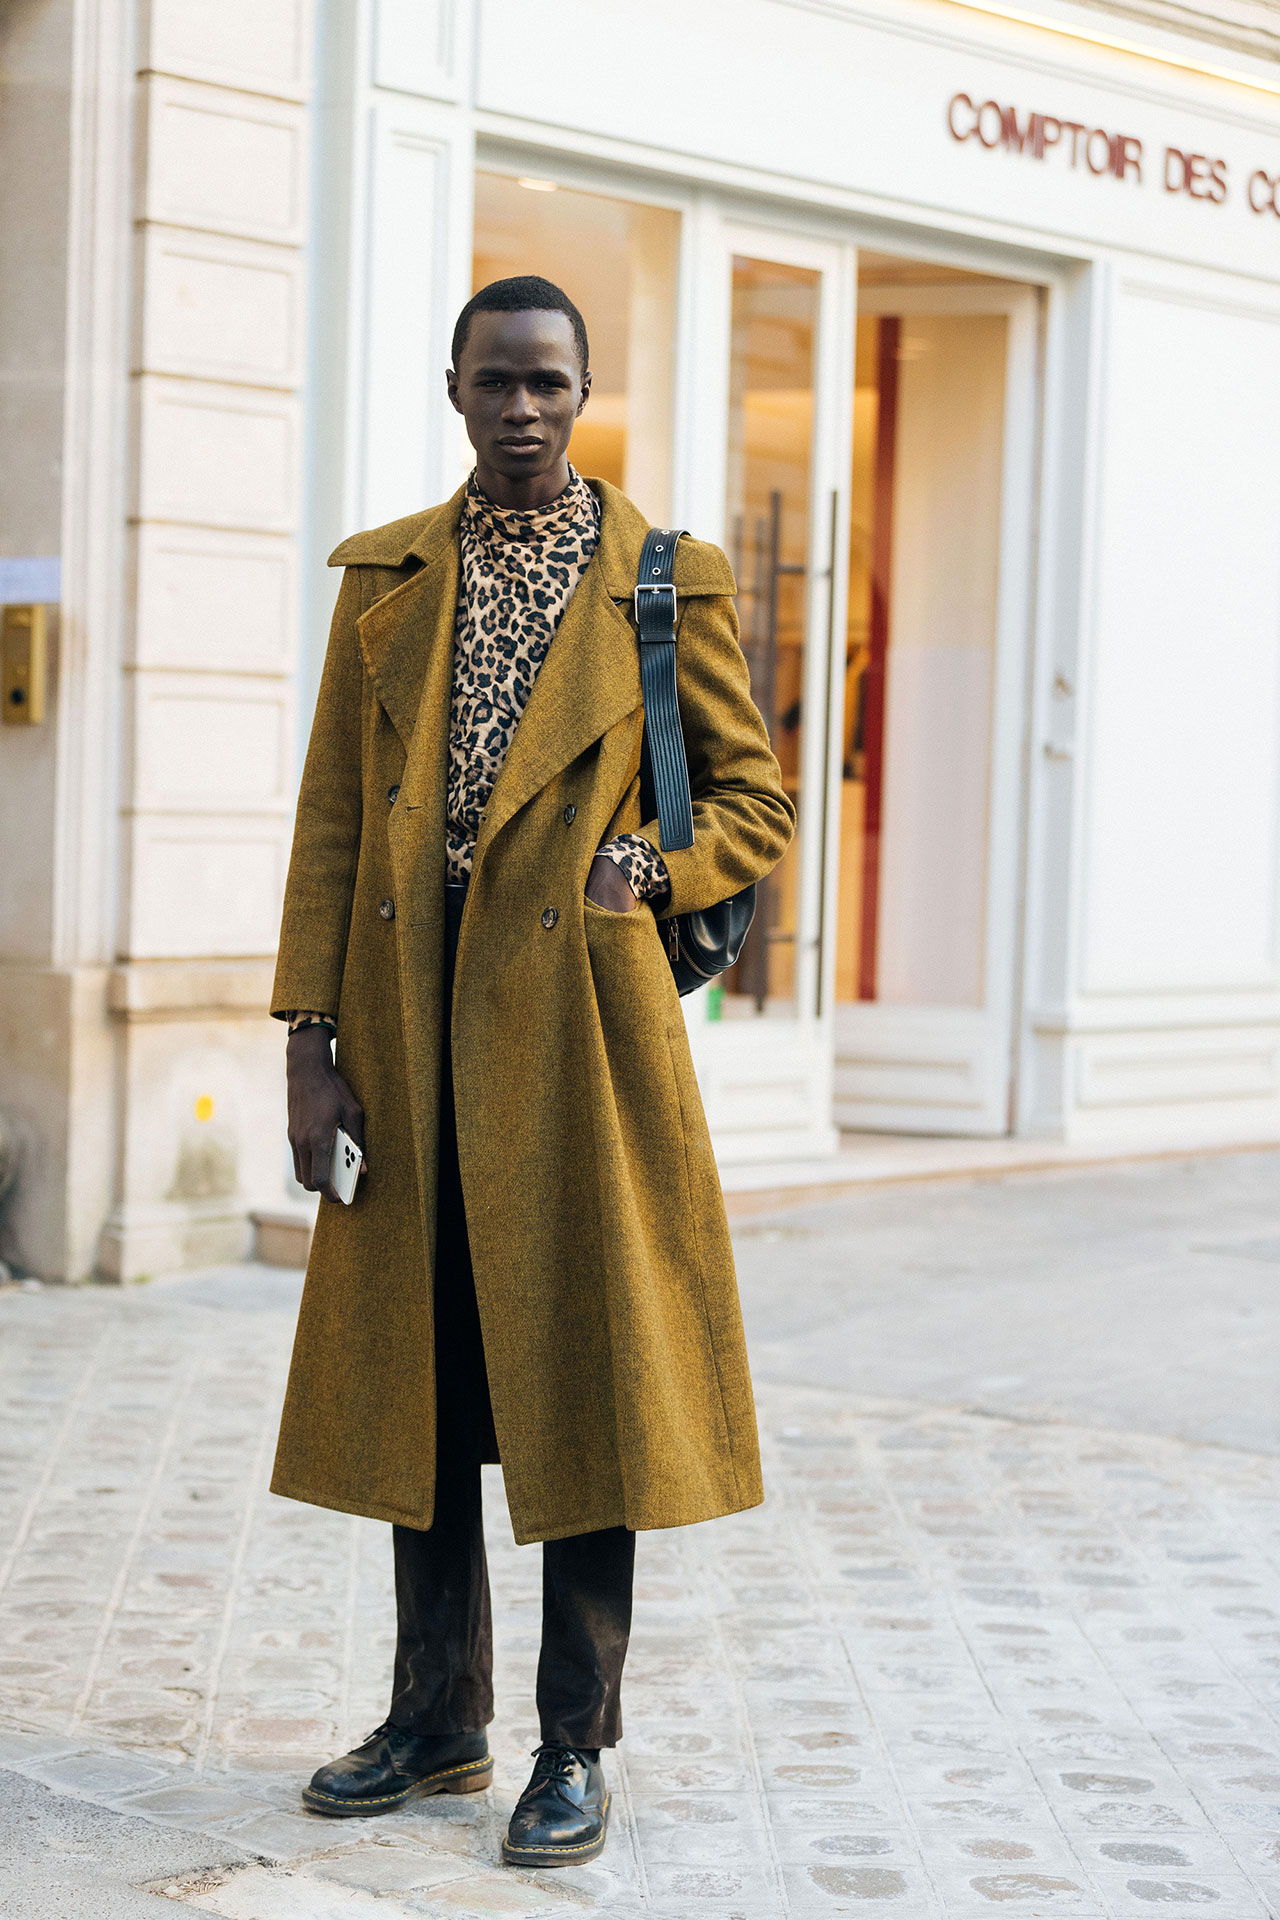 Malick Bodian Street Style at Paris Couture Spring 2020 Fashion Week by Melodie Jeng